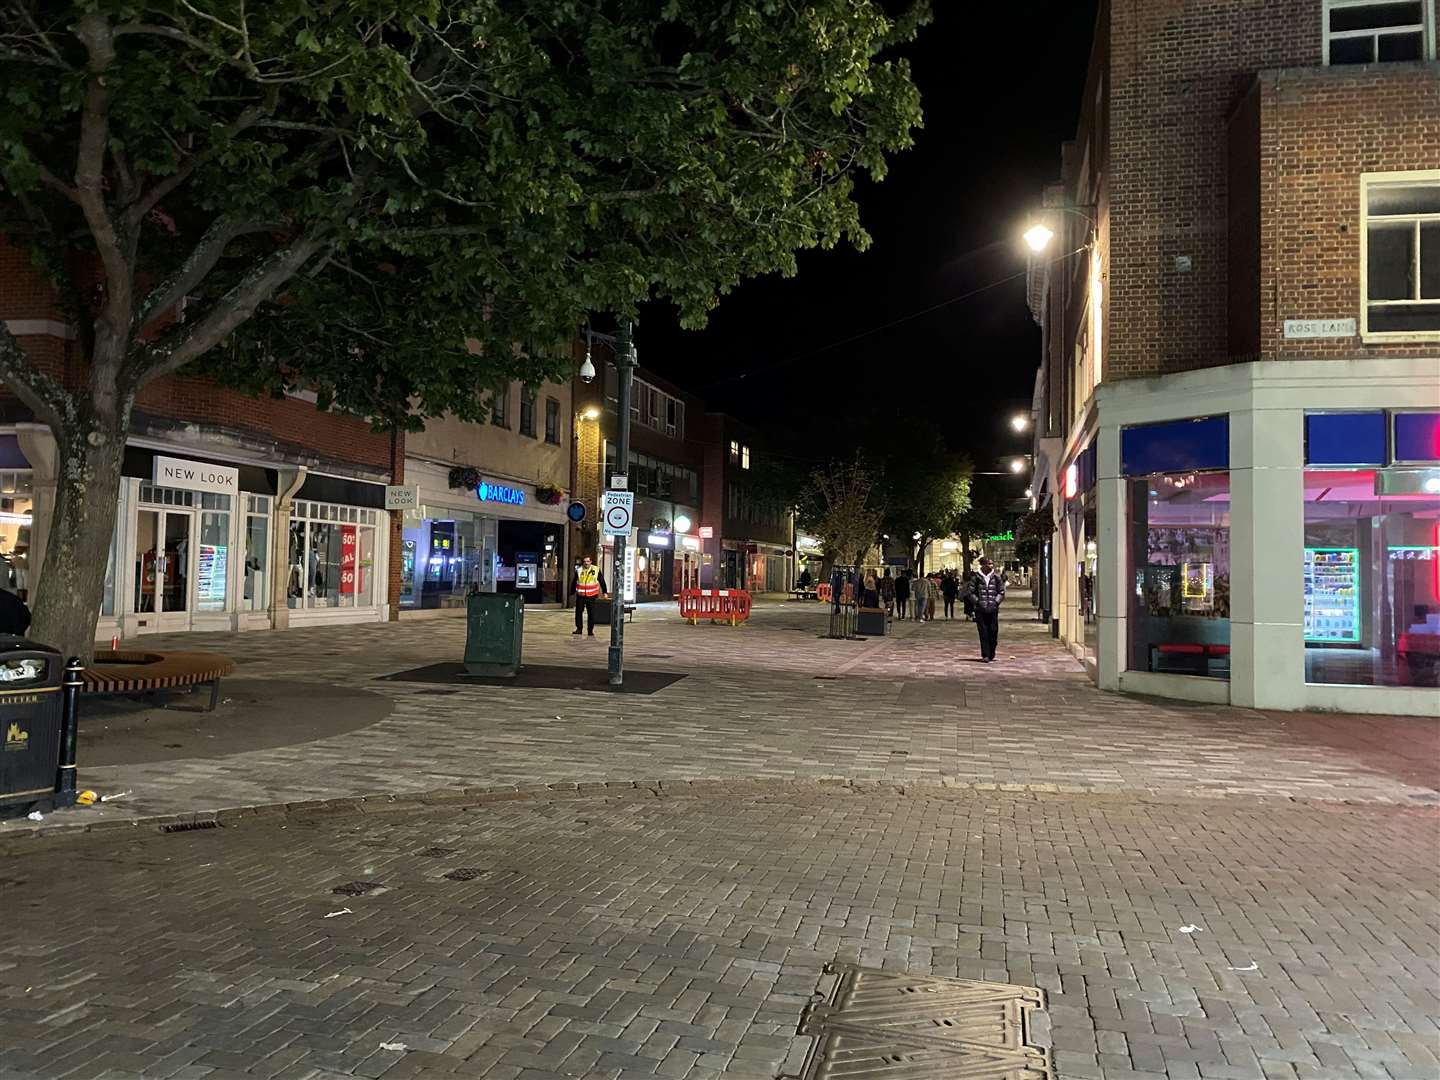 Canterbury high street was relatively quiet on Saturday night